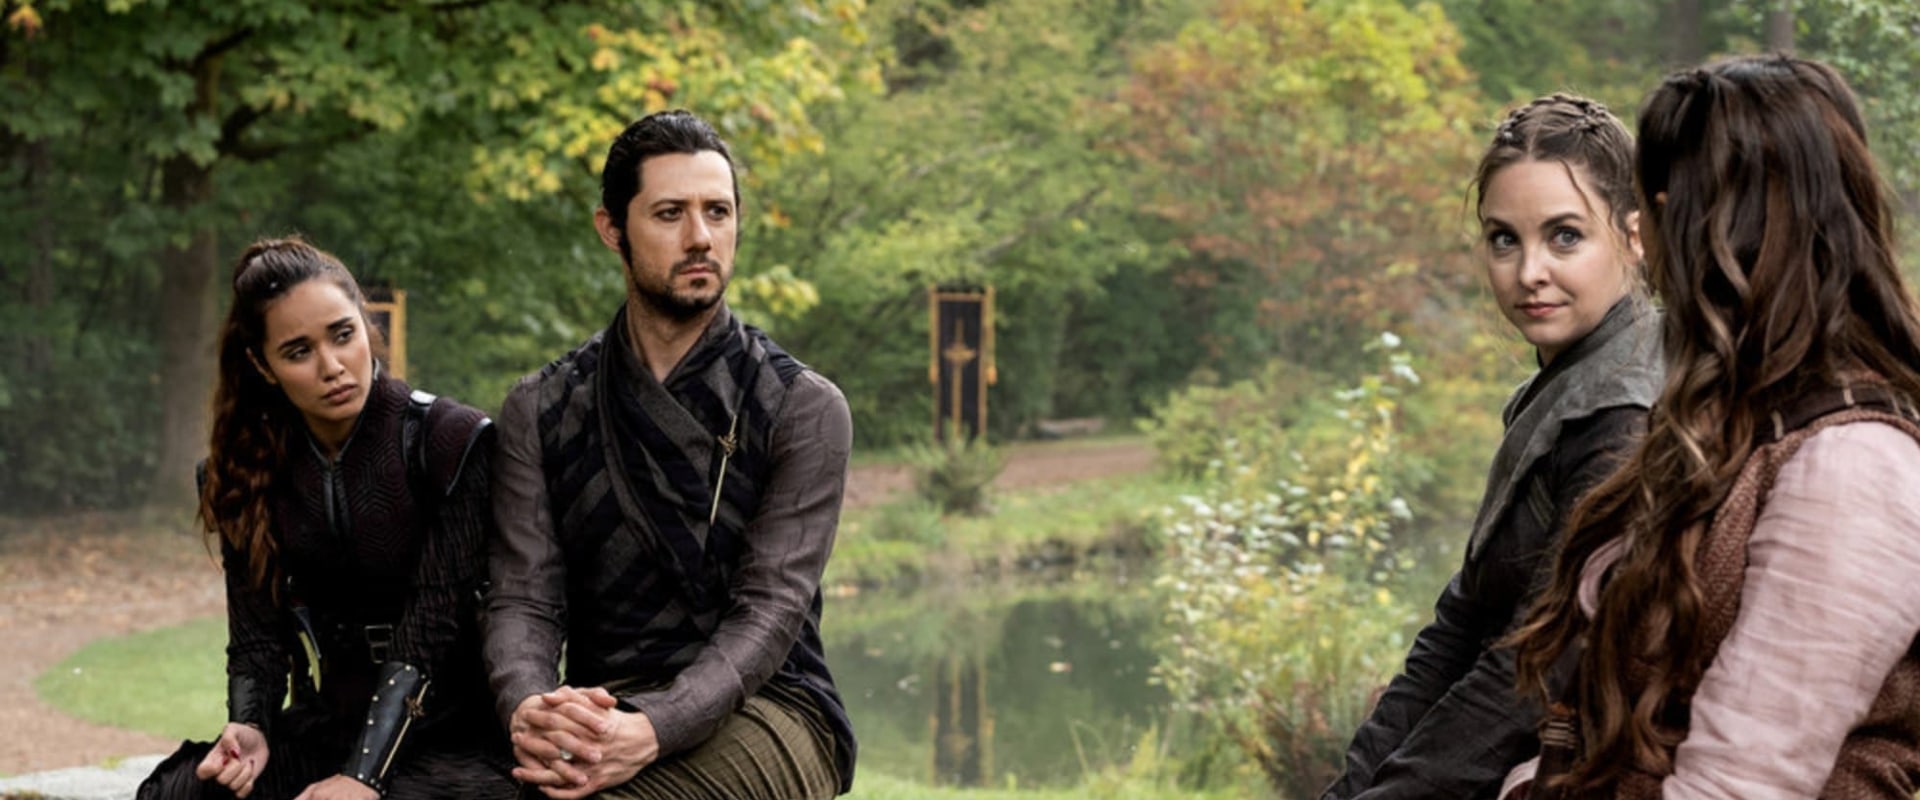 Is the magicians coming back to Netflix?